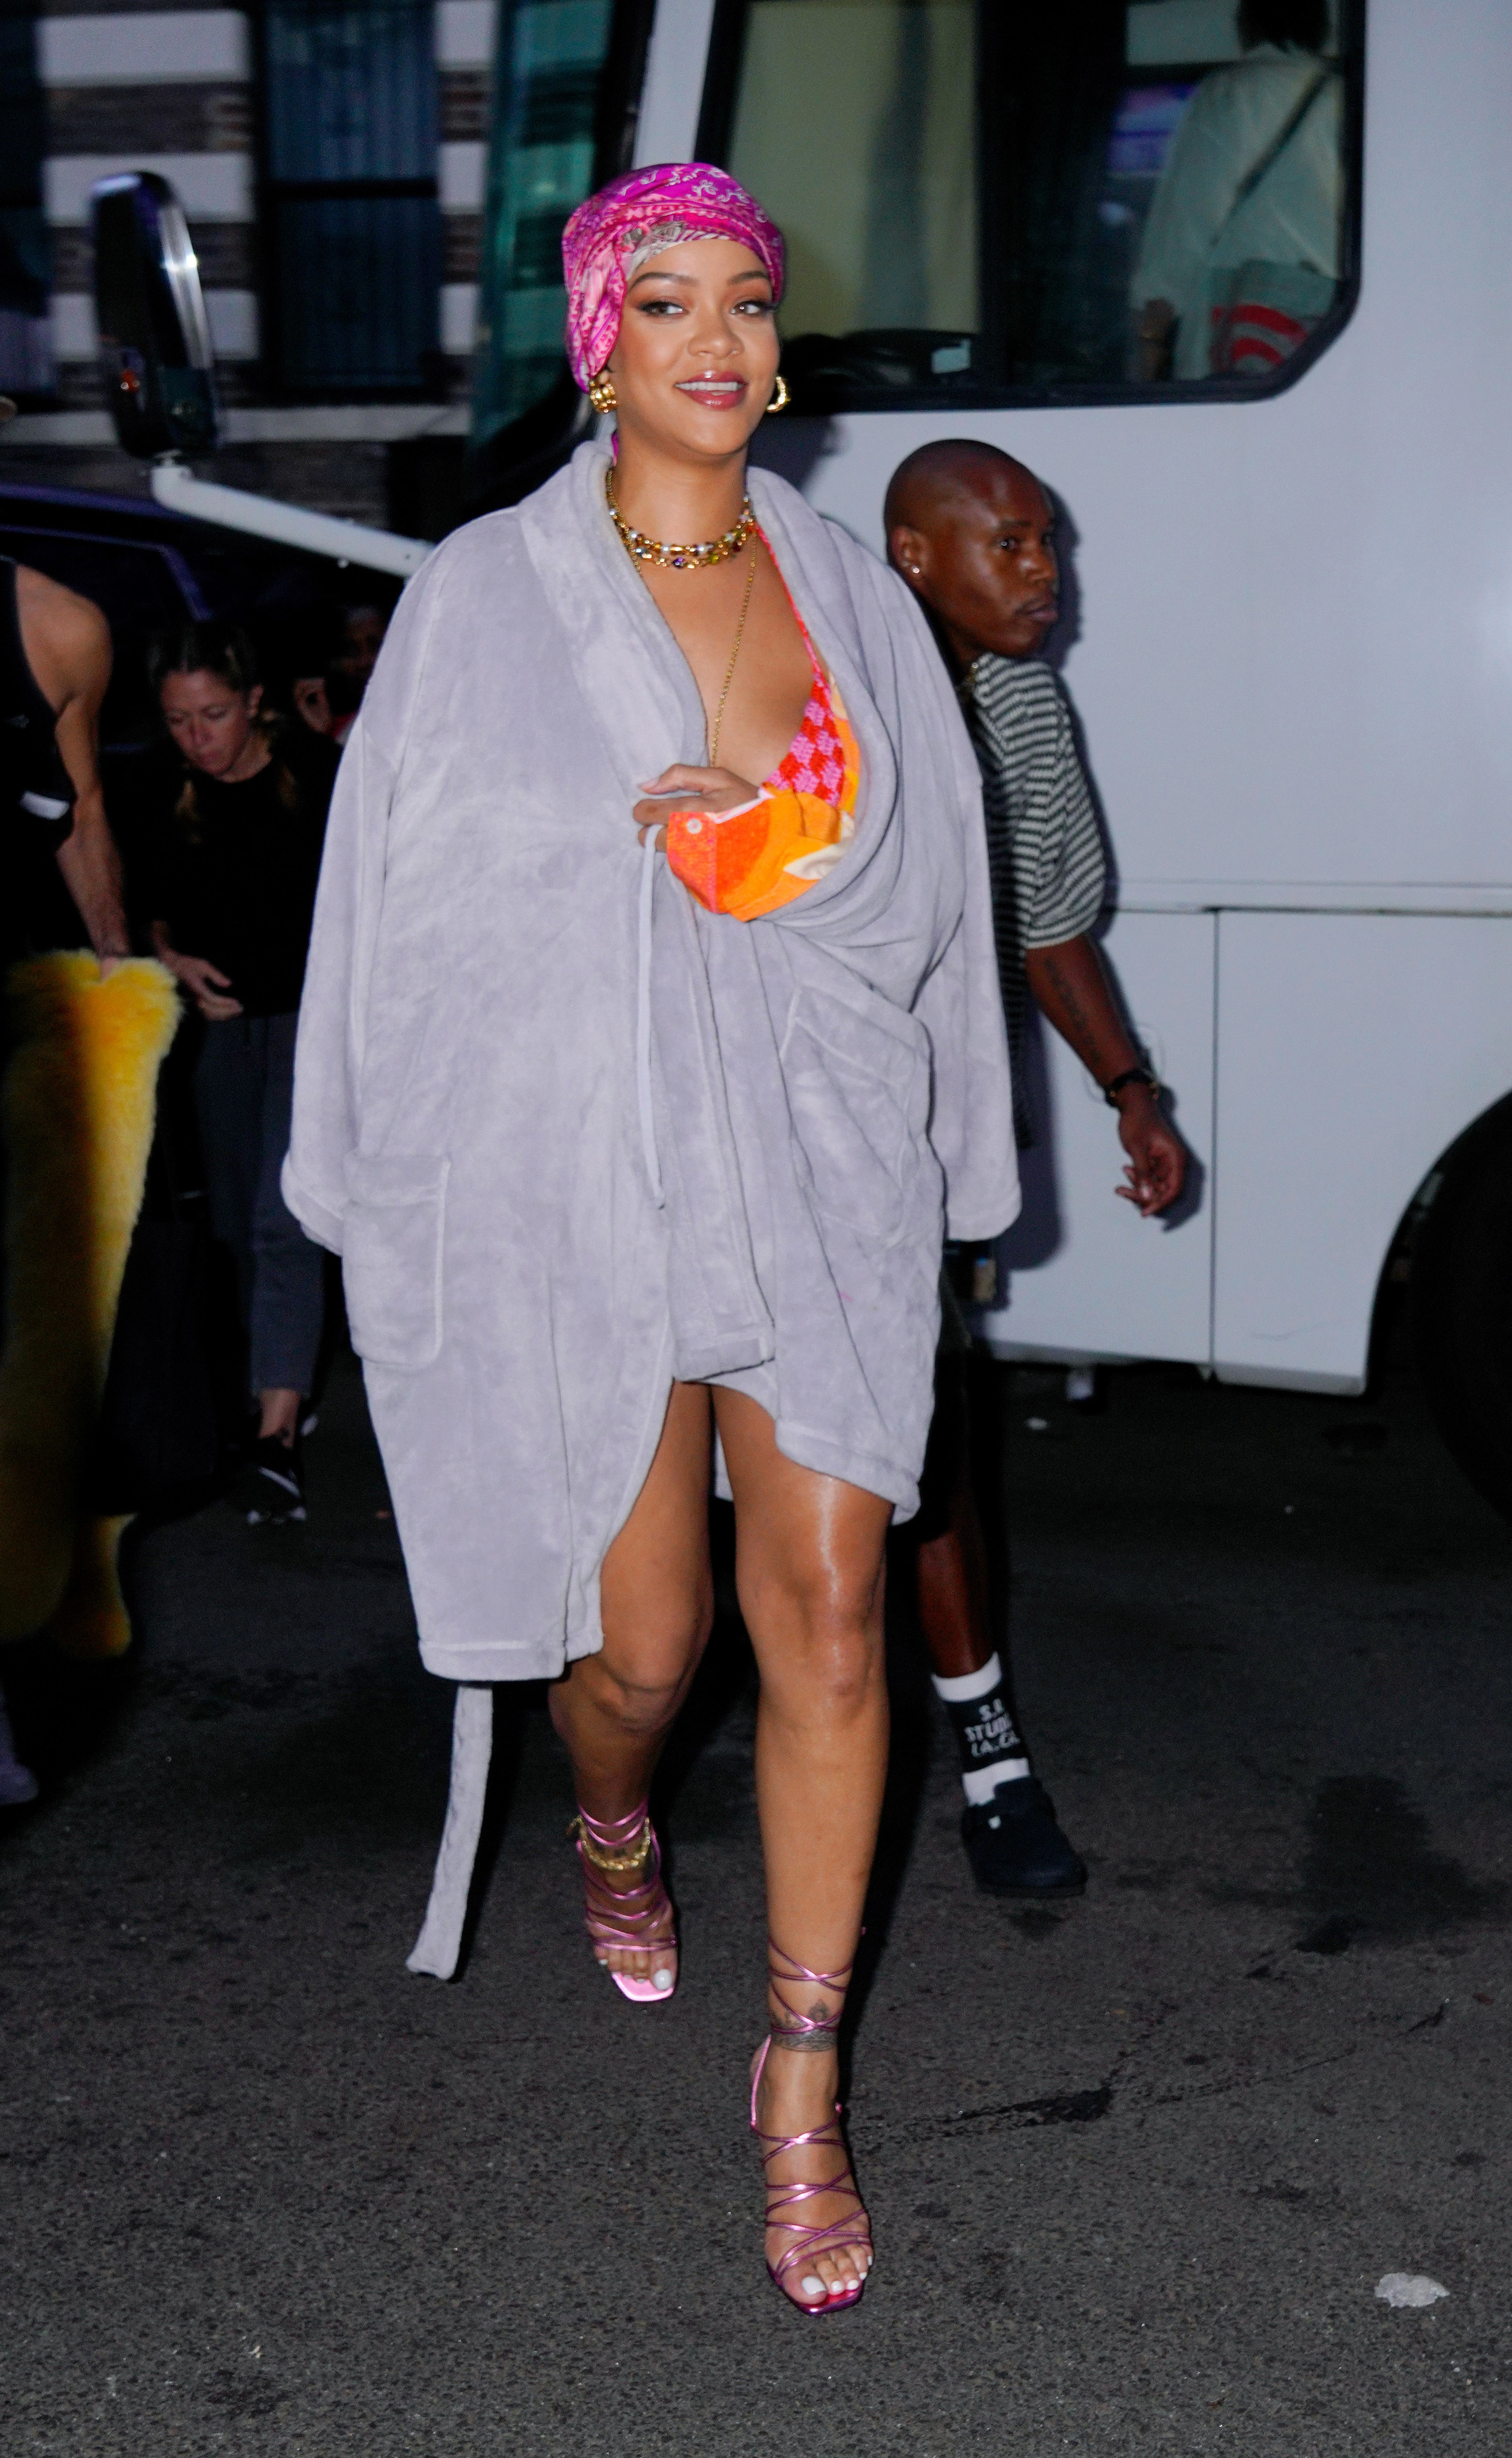 Rihanna is photographed outside in New York City in July of 2021